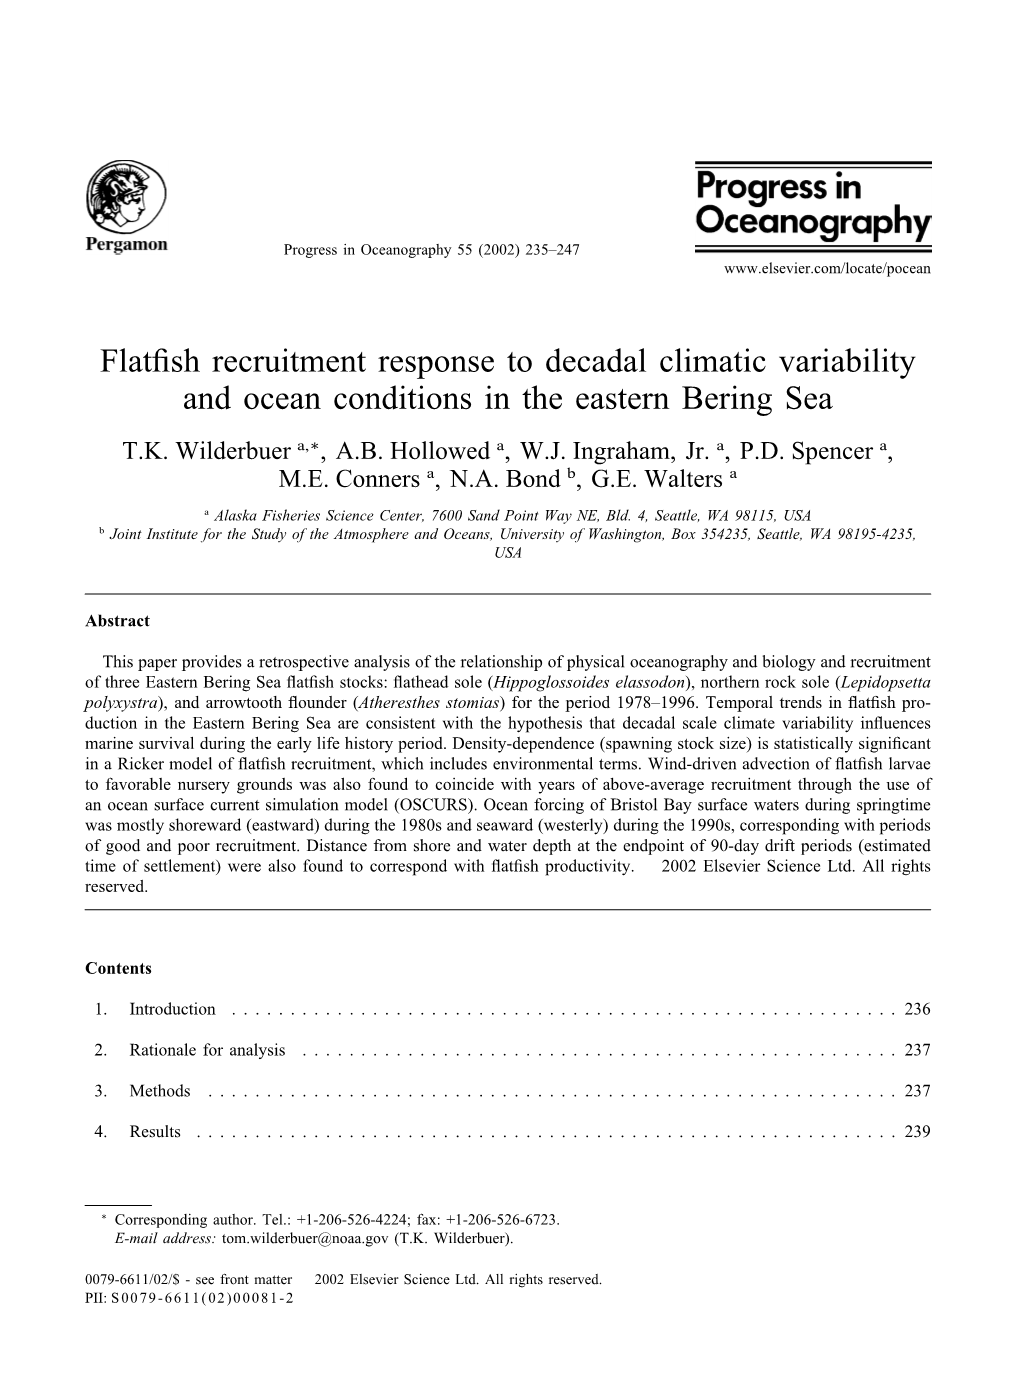 Flatfish Recruitment Response to Decadal Climatic Variability And